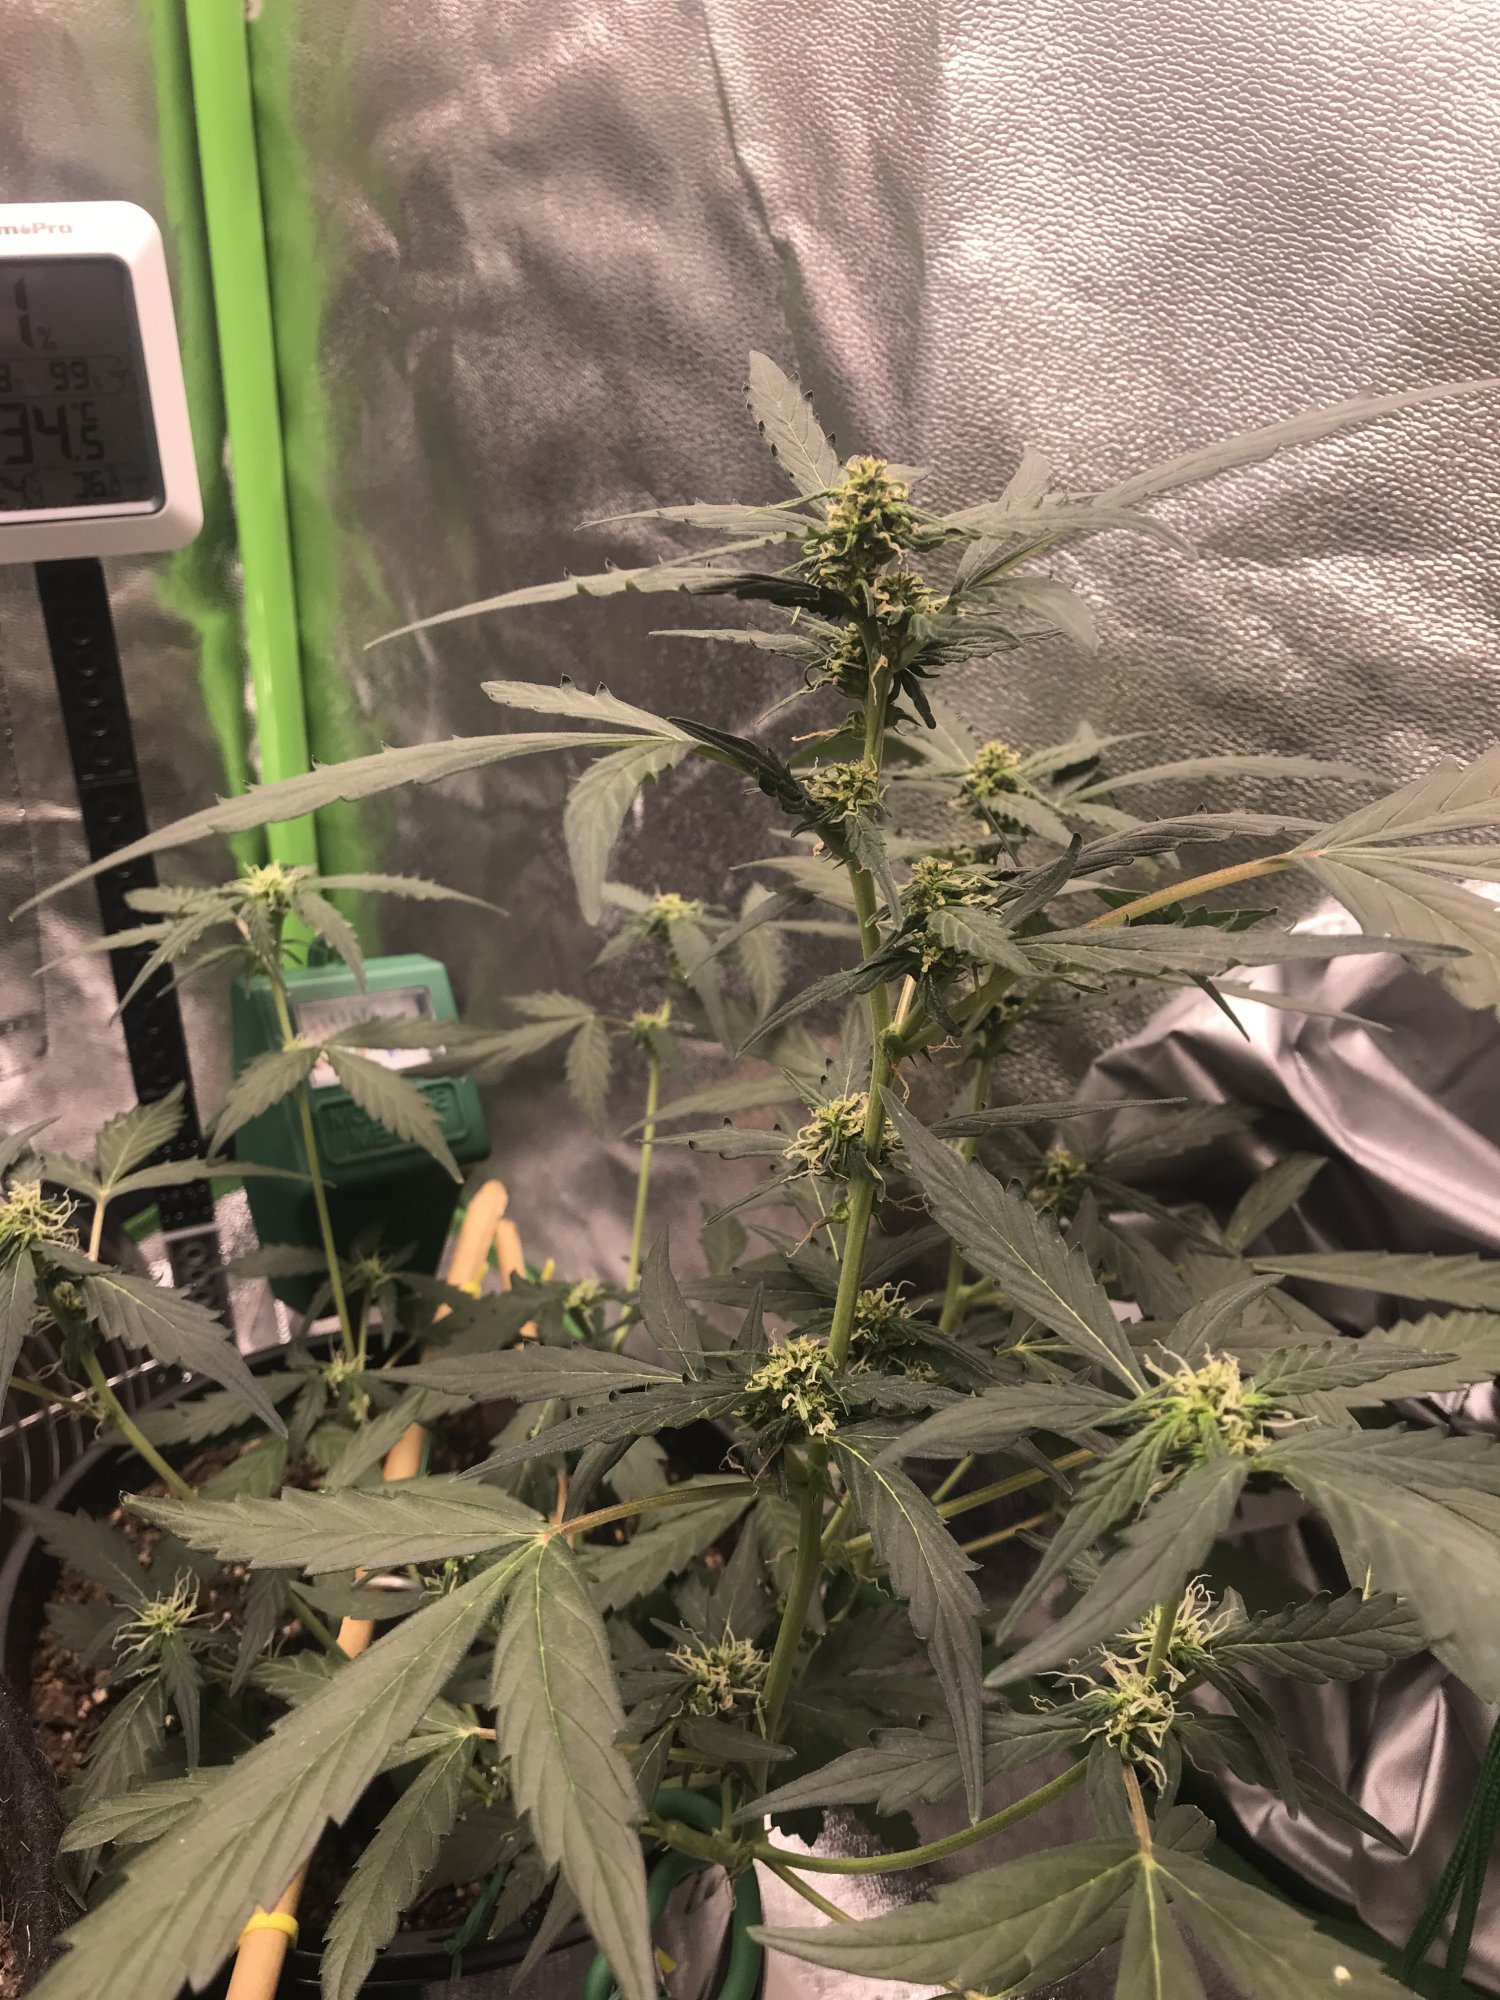 Auto flower seems to have stopped flowering